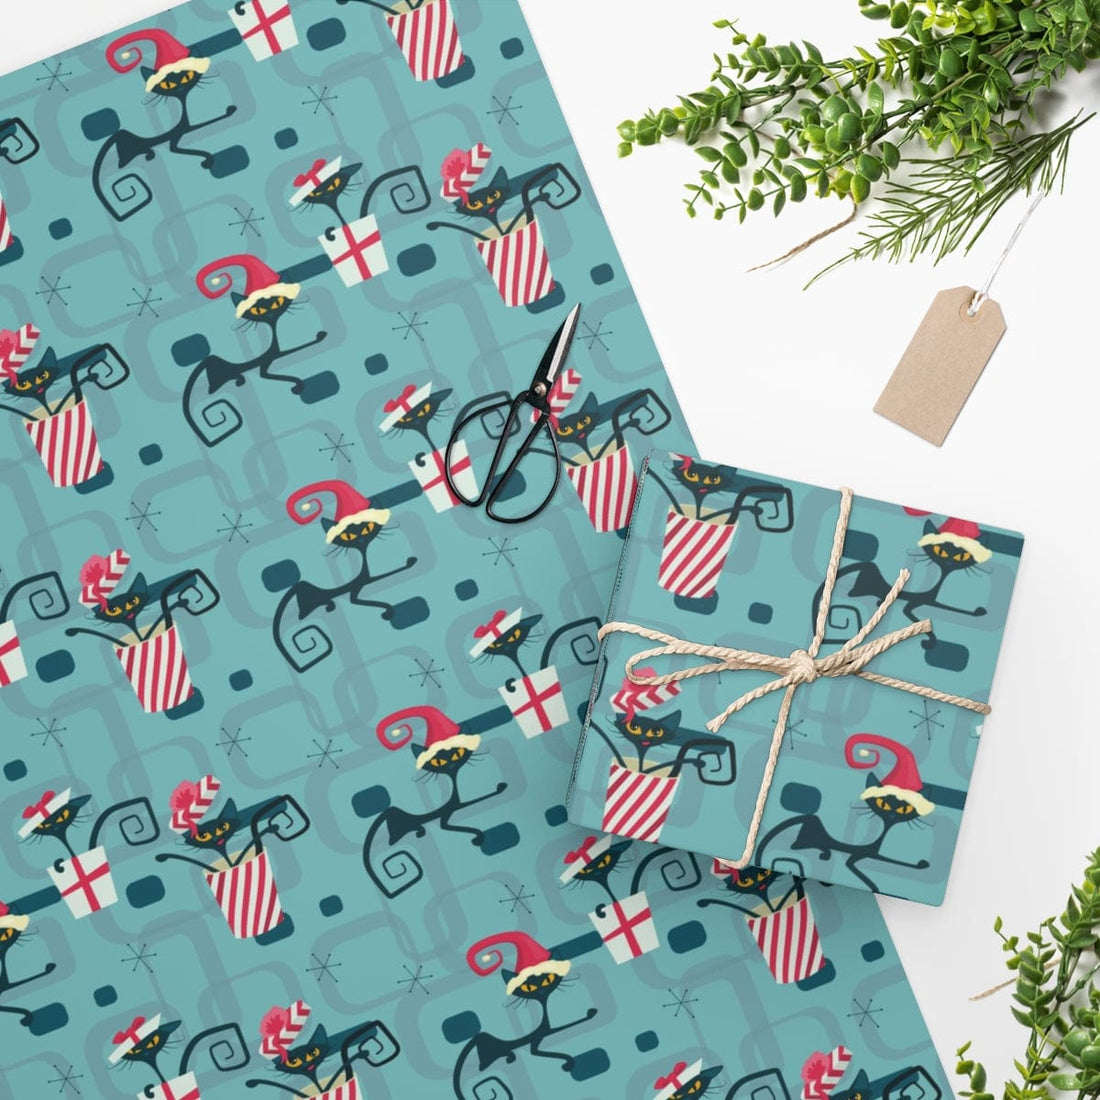 Kate McEnroe New York Atomic Cat Retro Kitschy Wrapping Paper Seasonal &amp; Holiday Decorations 24&quot; × 36&quot; 33680956270837413102